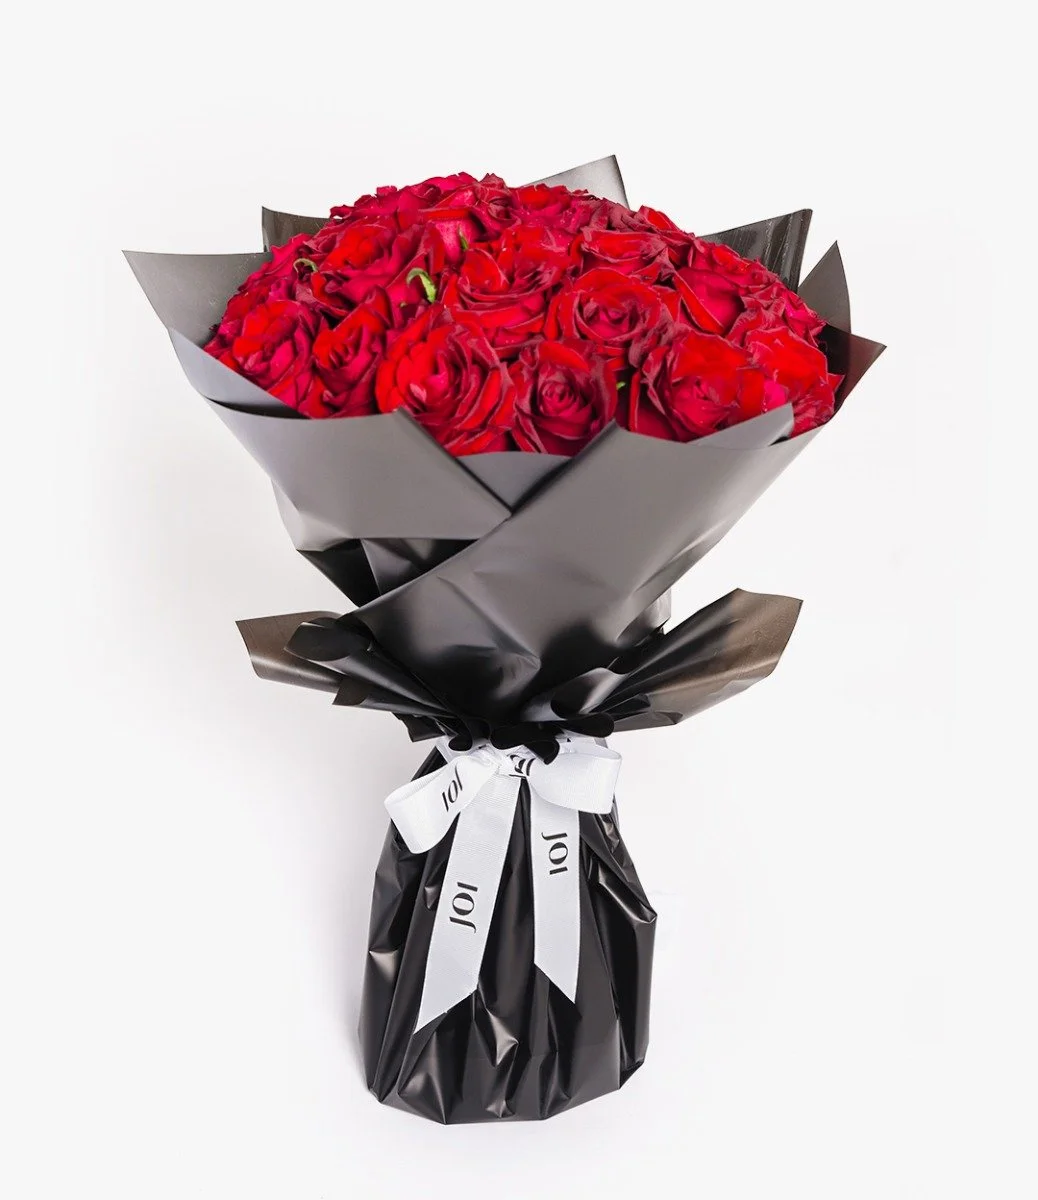 24 Roses Hand Bouquet